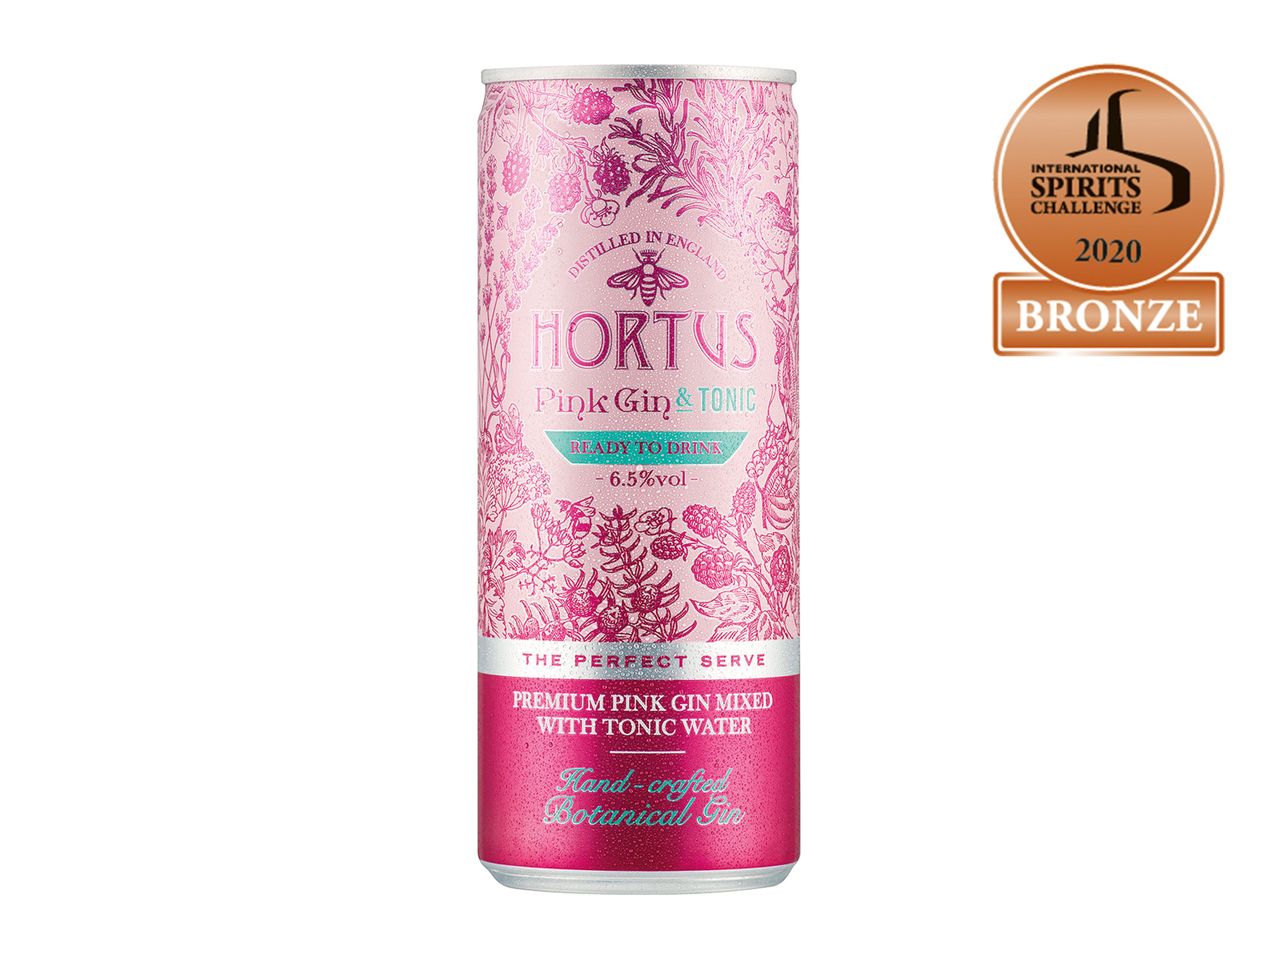 Go to full screen view: Hortus Pink Gin & Tonic - Image 1